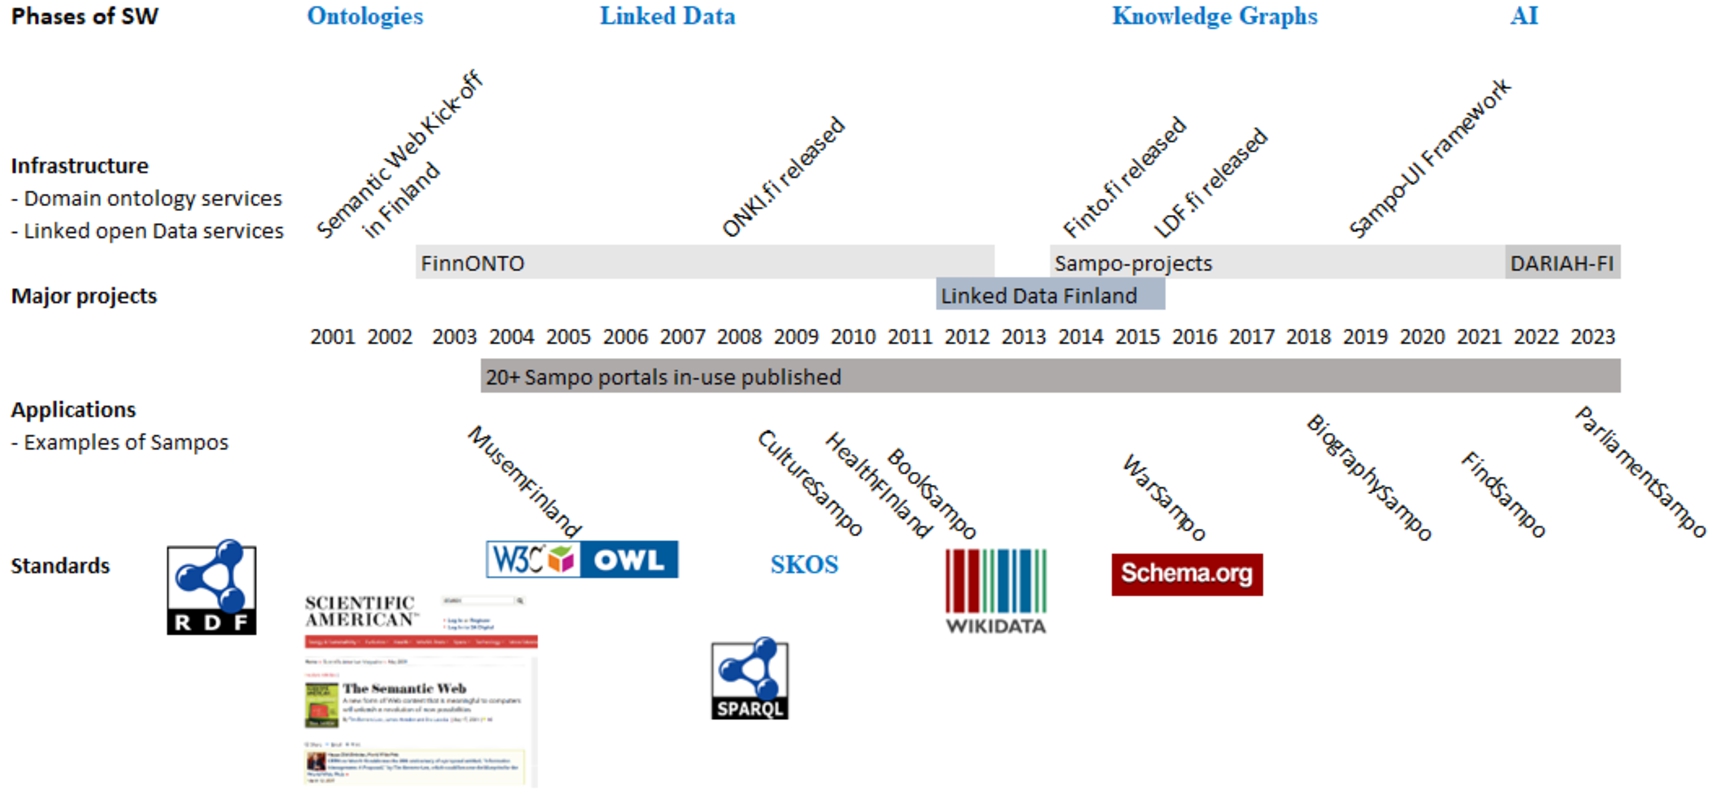 Timeline illustrating the development of the Semantic Web and work reported in this paper.